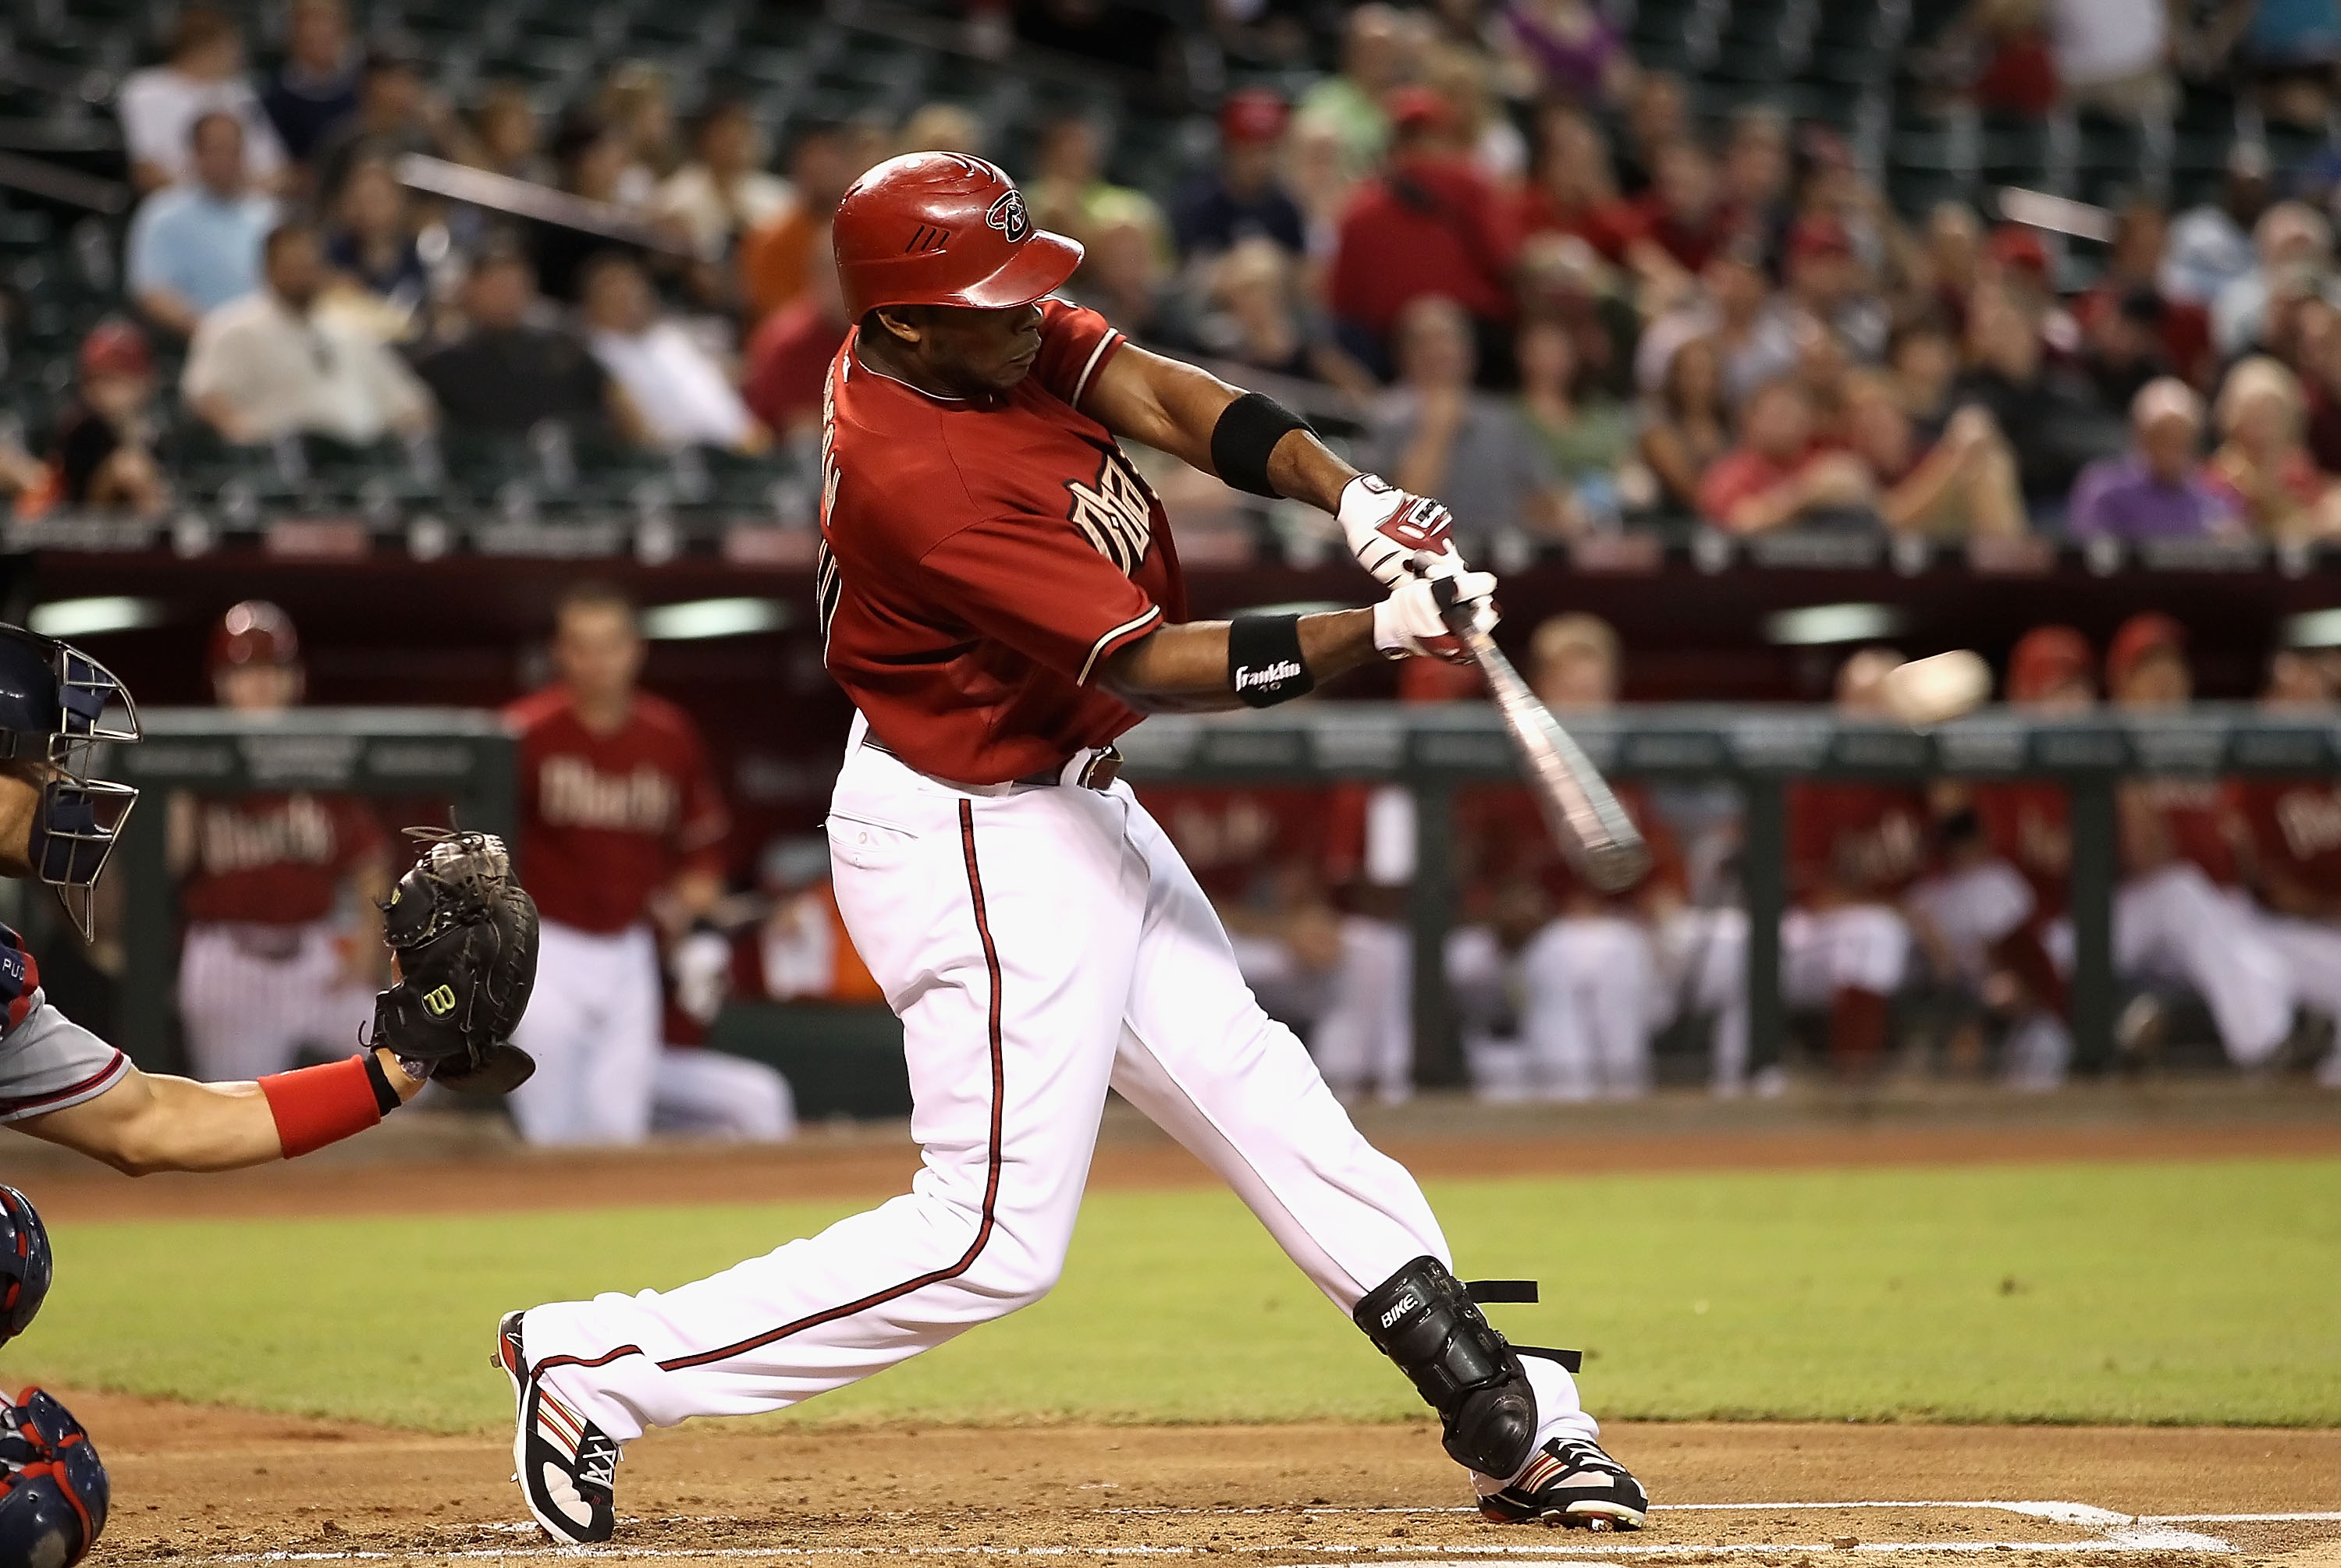 PHOENIX - AUGUST 04:  Justin Upton #24 of the Arizona Diamondbacks hits a RBI single against the Washington Nationals during the first inning of the Major League Baseball game at Chase Field on August 4, 2010 in Phoenix, Arizona.  (Photo by Christian Pete